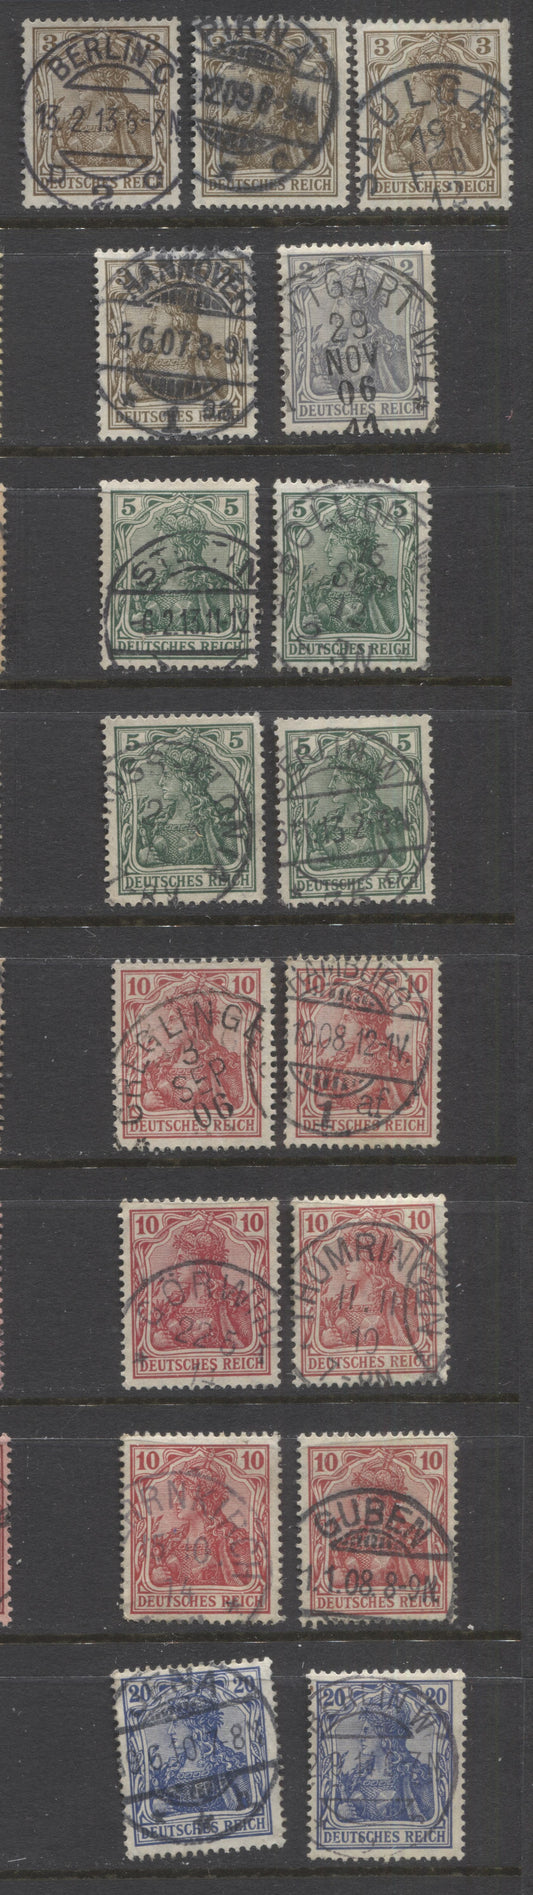 Lot 435 Germany SC#80-83h 1905-1914 Watermarked Pre-War Germania Issue, All With SON Town Cancels, Different Shades, 17 VF Used Singles, Click on Listing to See ALL Pictures, 2022 Scott Classic Cat. $25.6